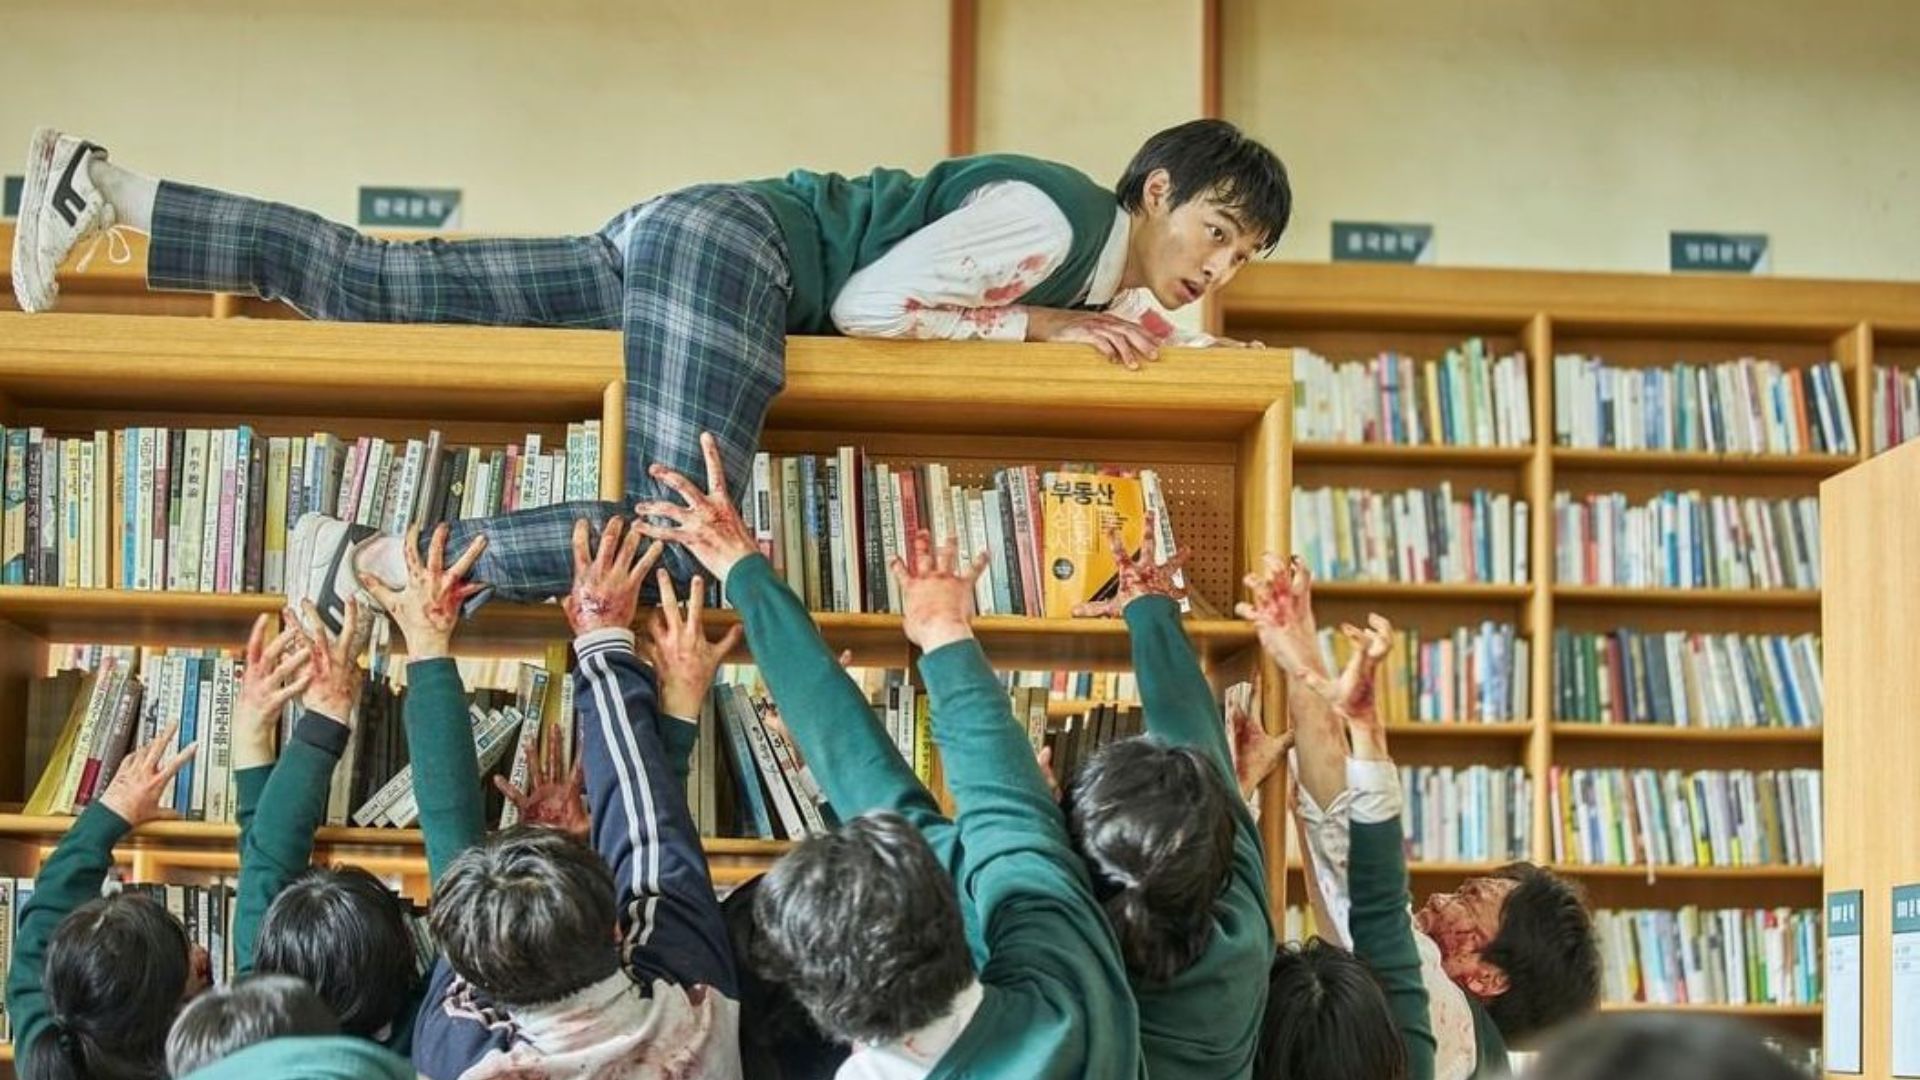 Top 5 Post-Apocalyptic Korean Shows on Netflix You Should Watch